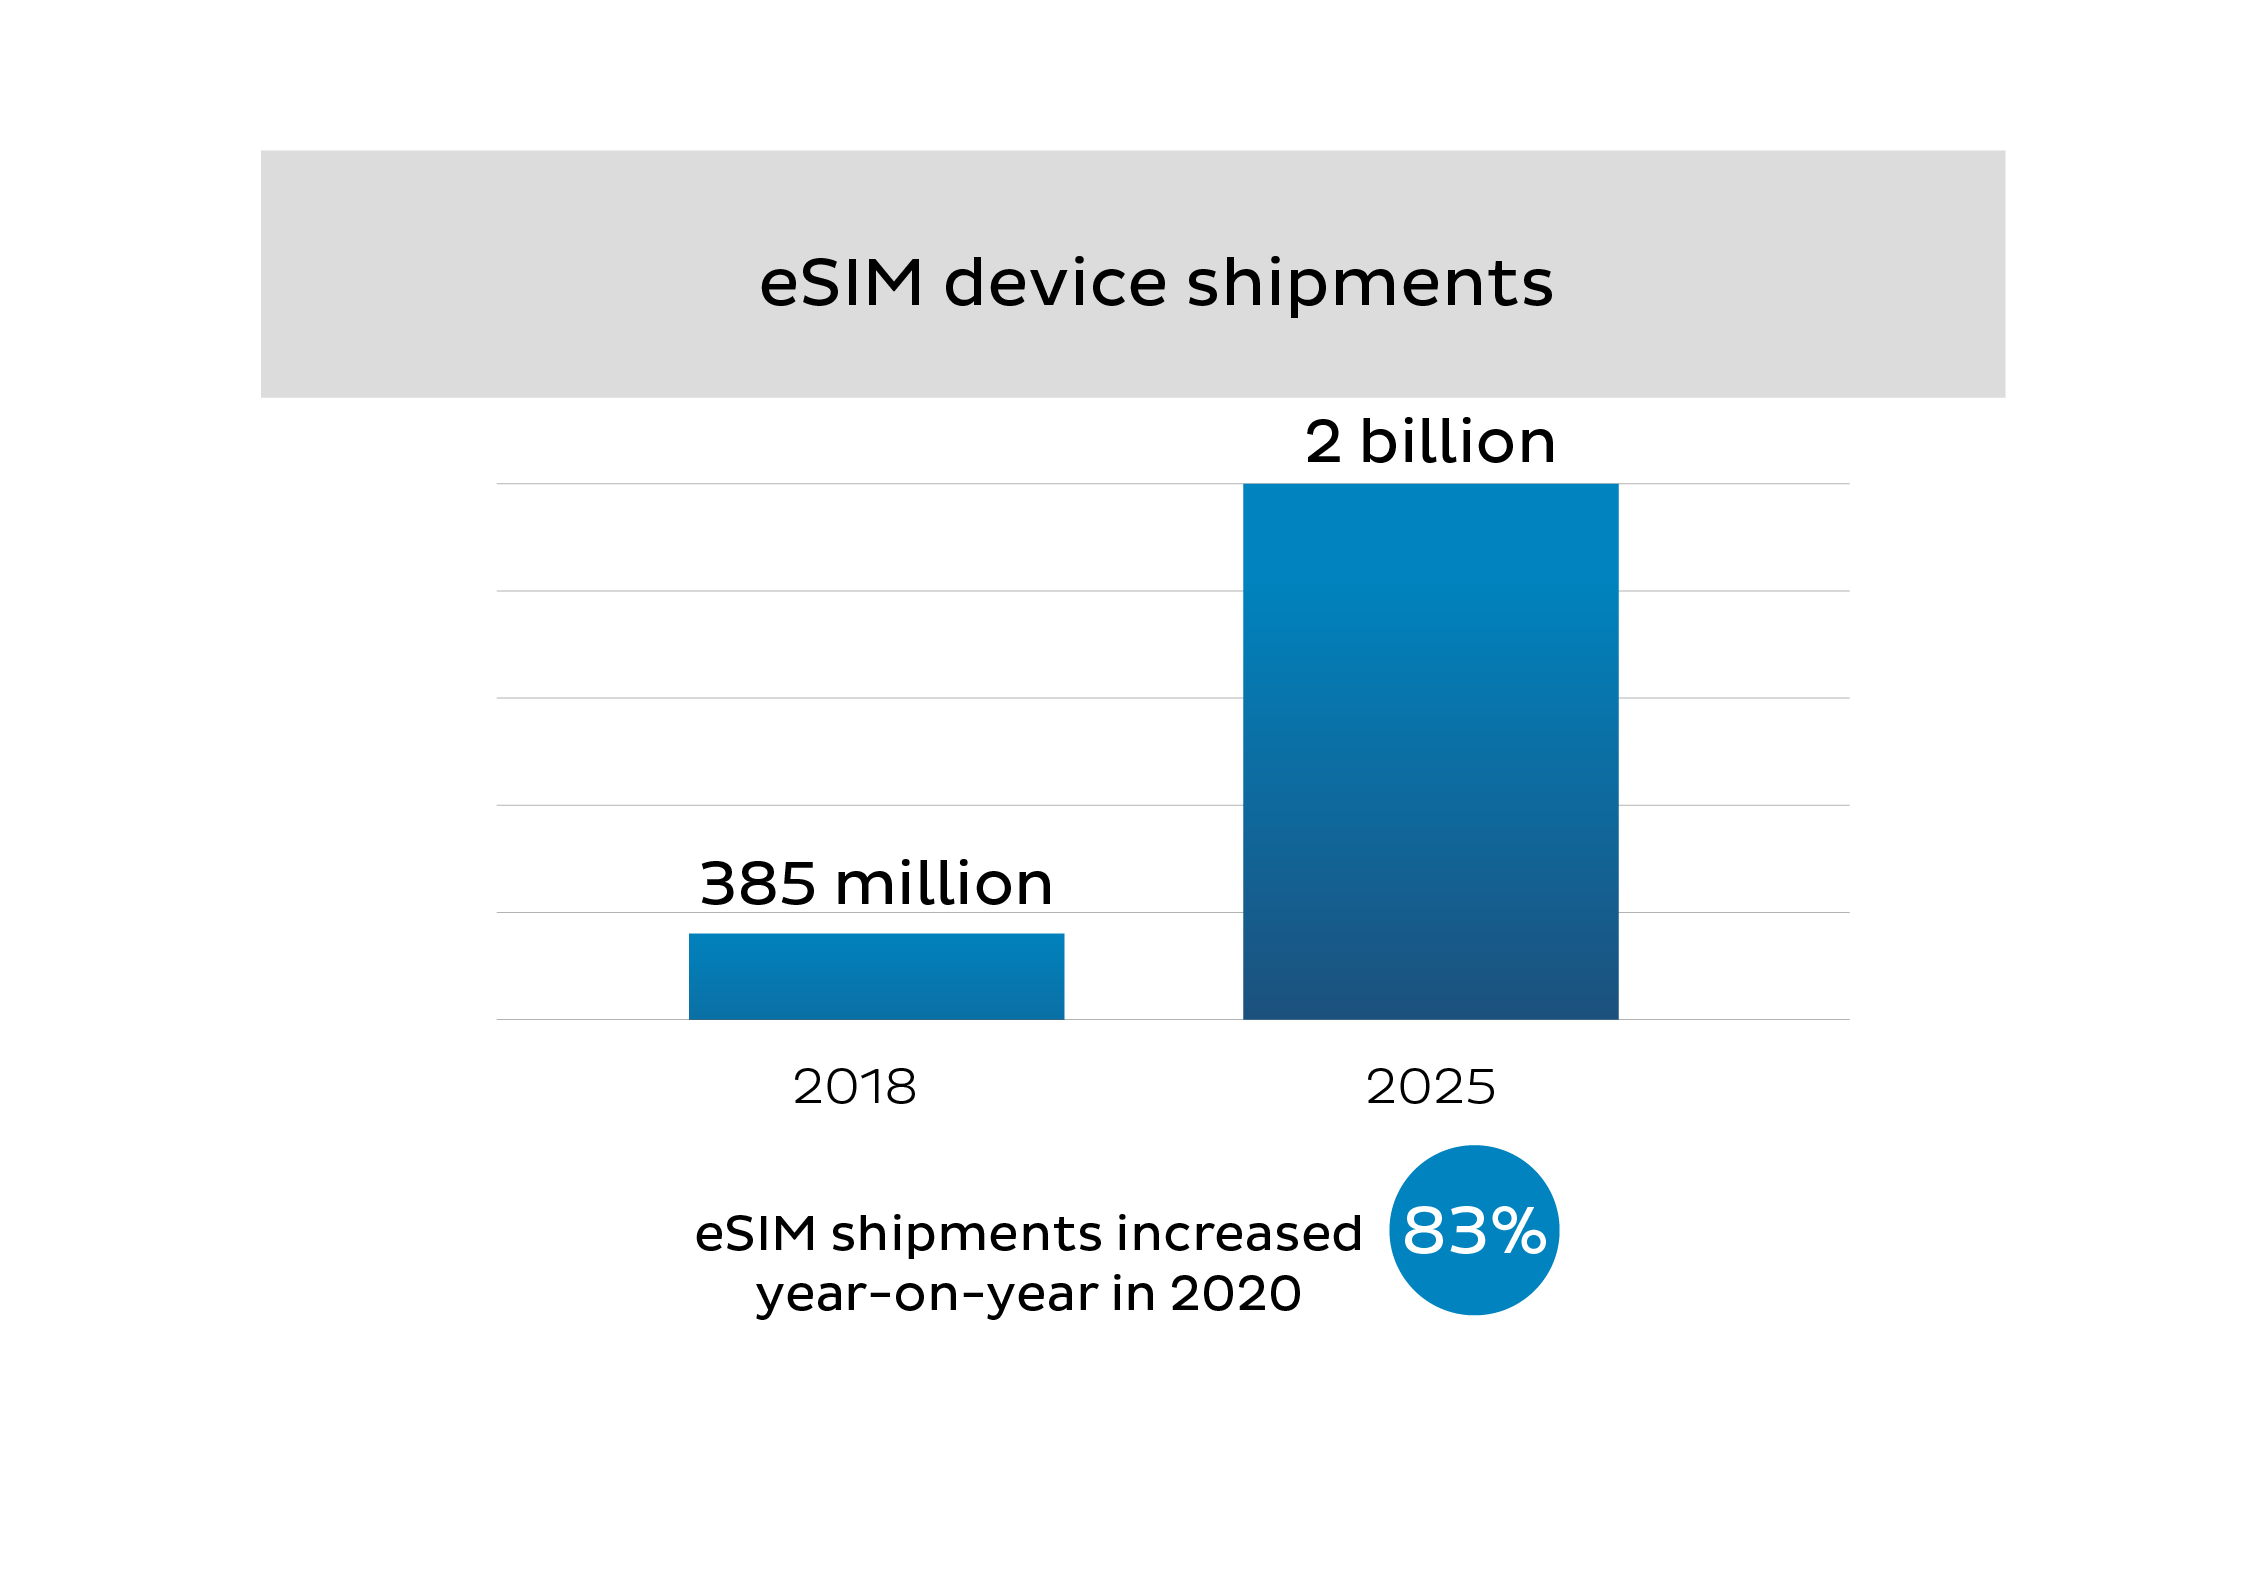 eSIM device shipments comparison between 2018 and 2025